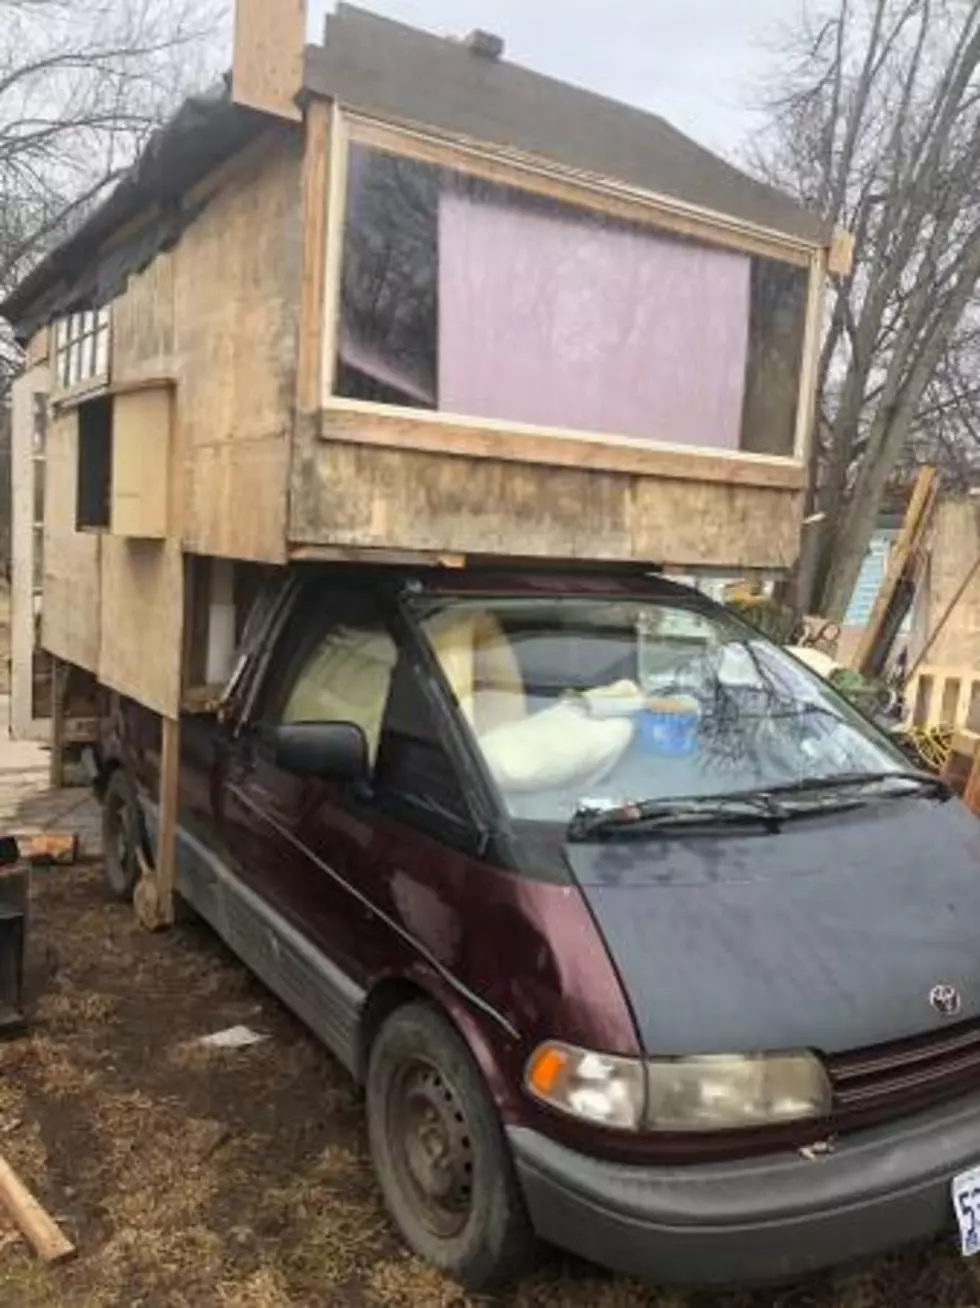 Michigan Man Selling House Car, And This Thing Is Haggard